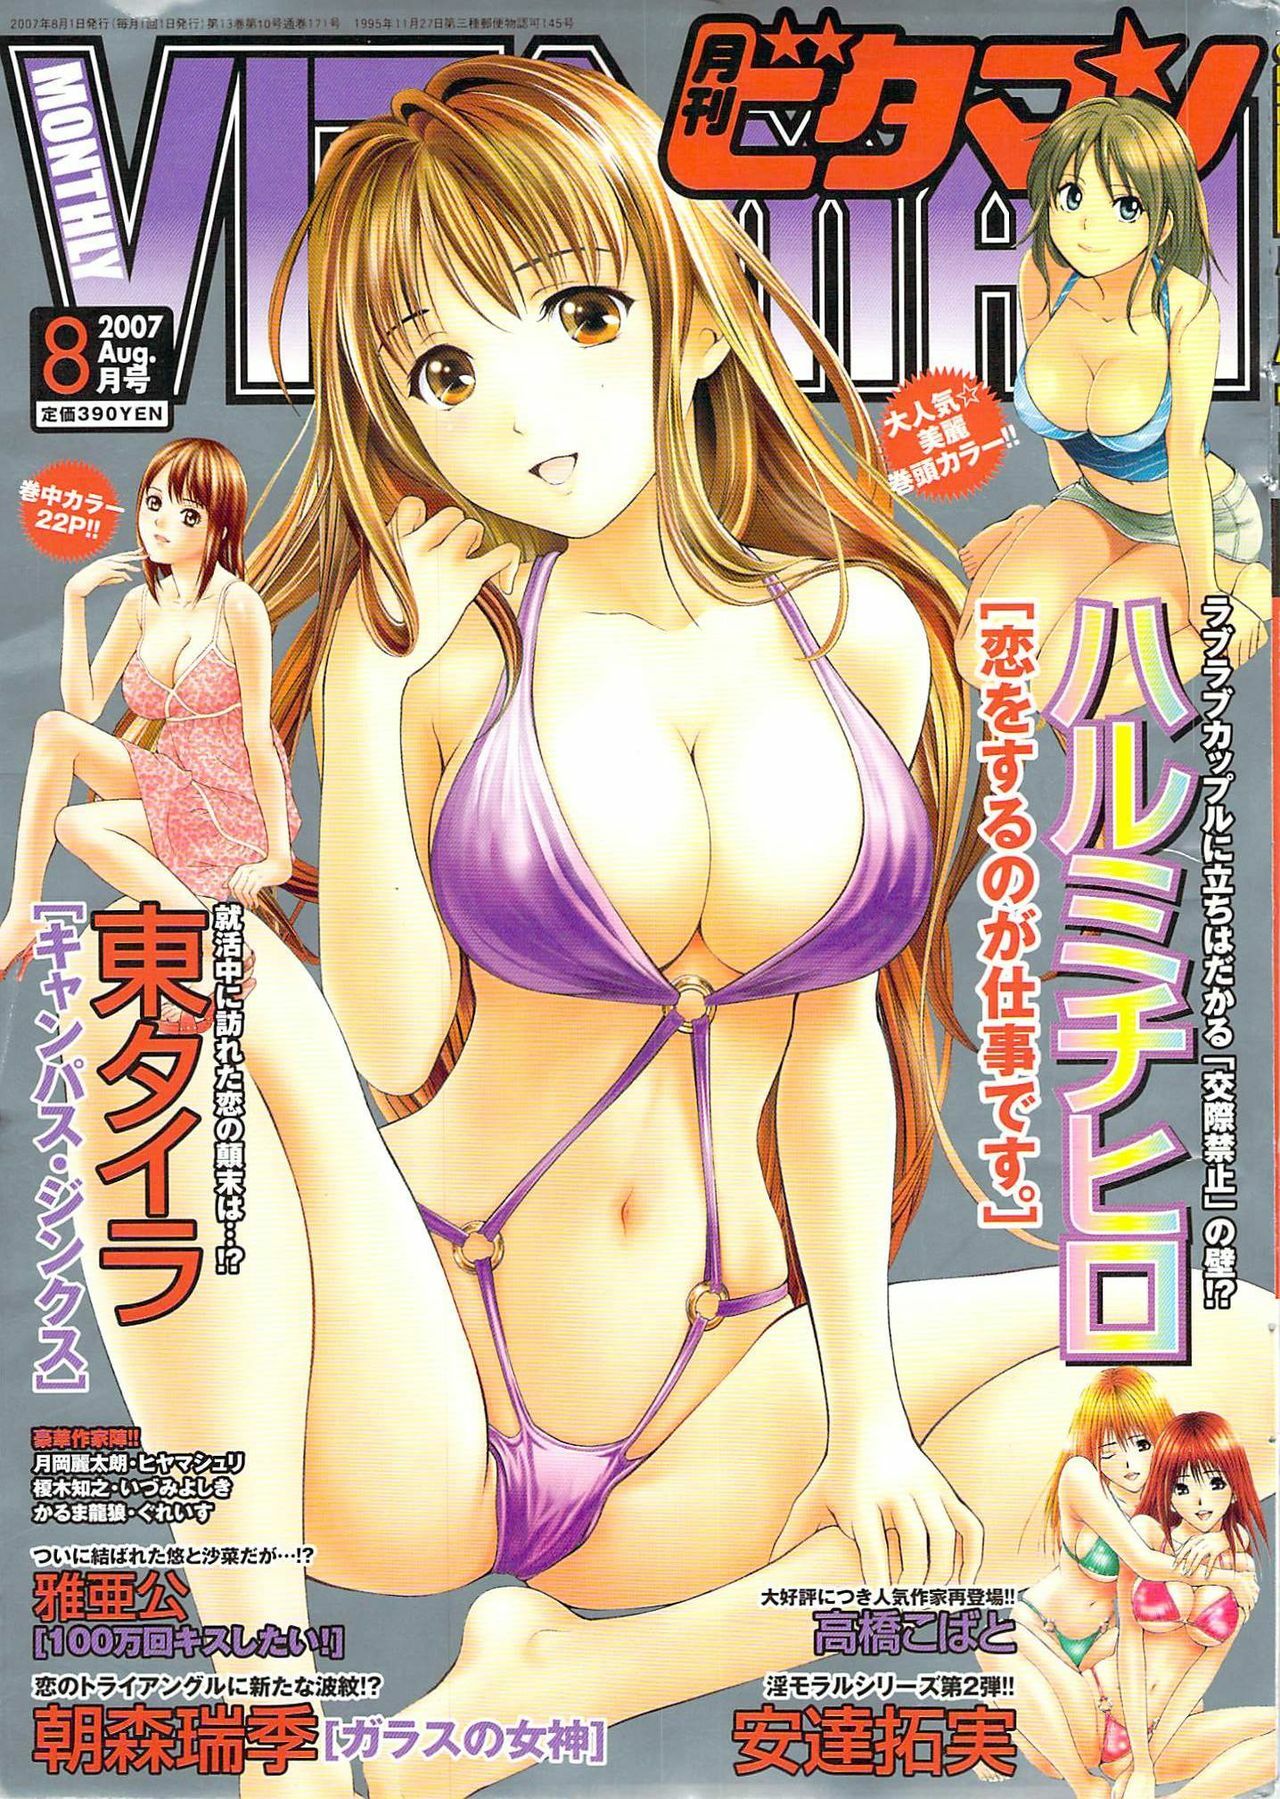 Monthly Vitaman 2007-08 page 1 full